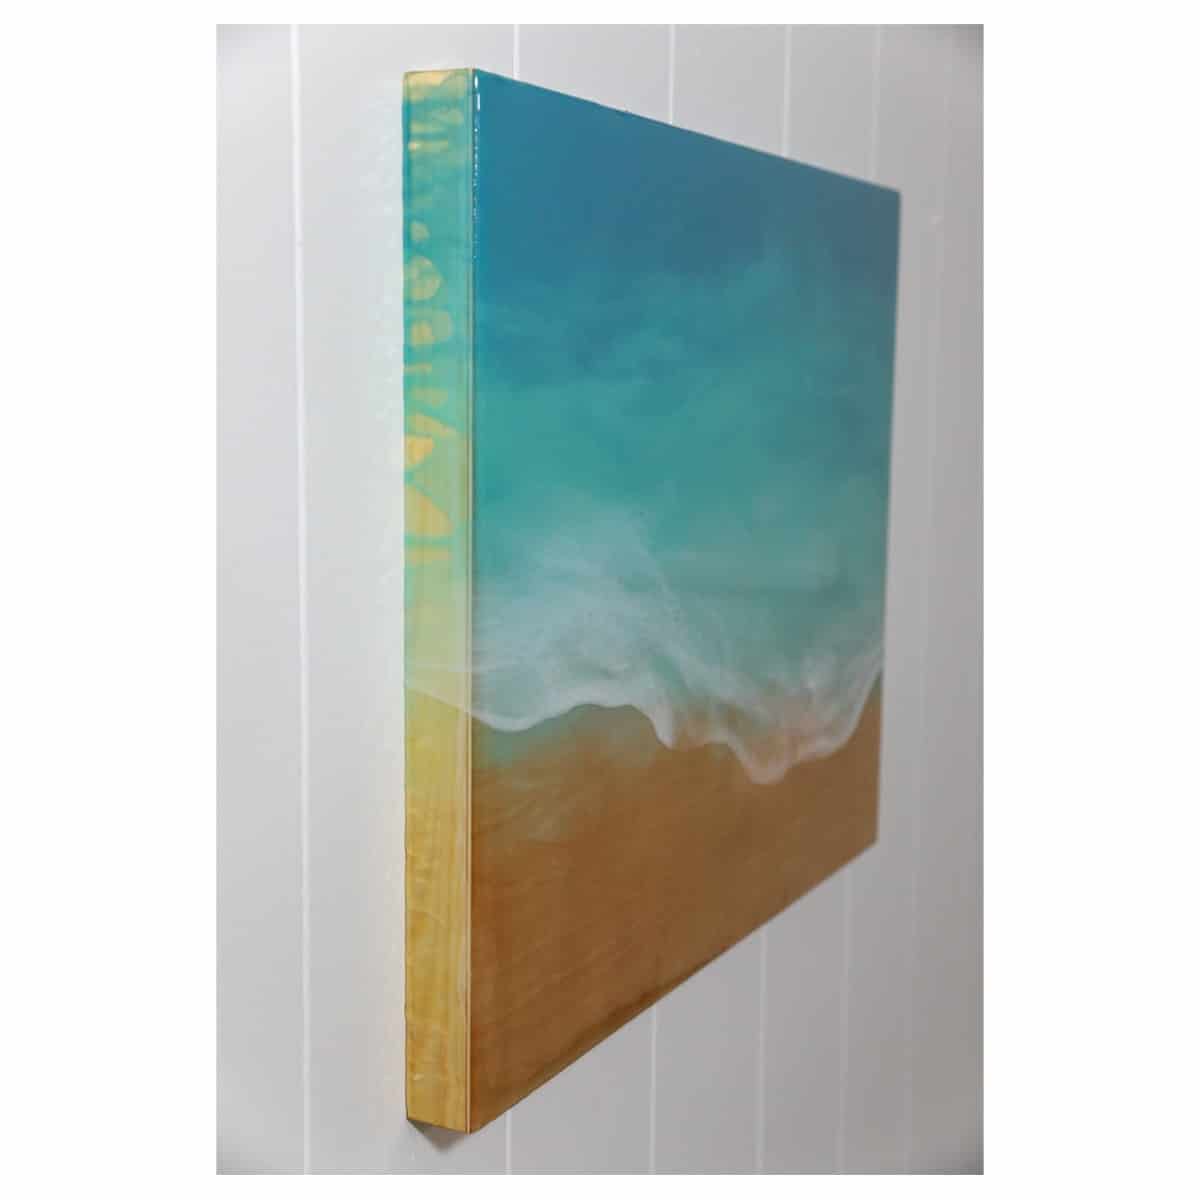 Bree poort sunset colors cast on the sand original resin painting side view